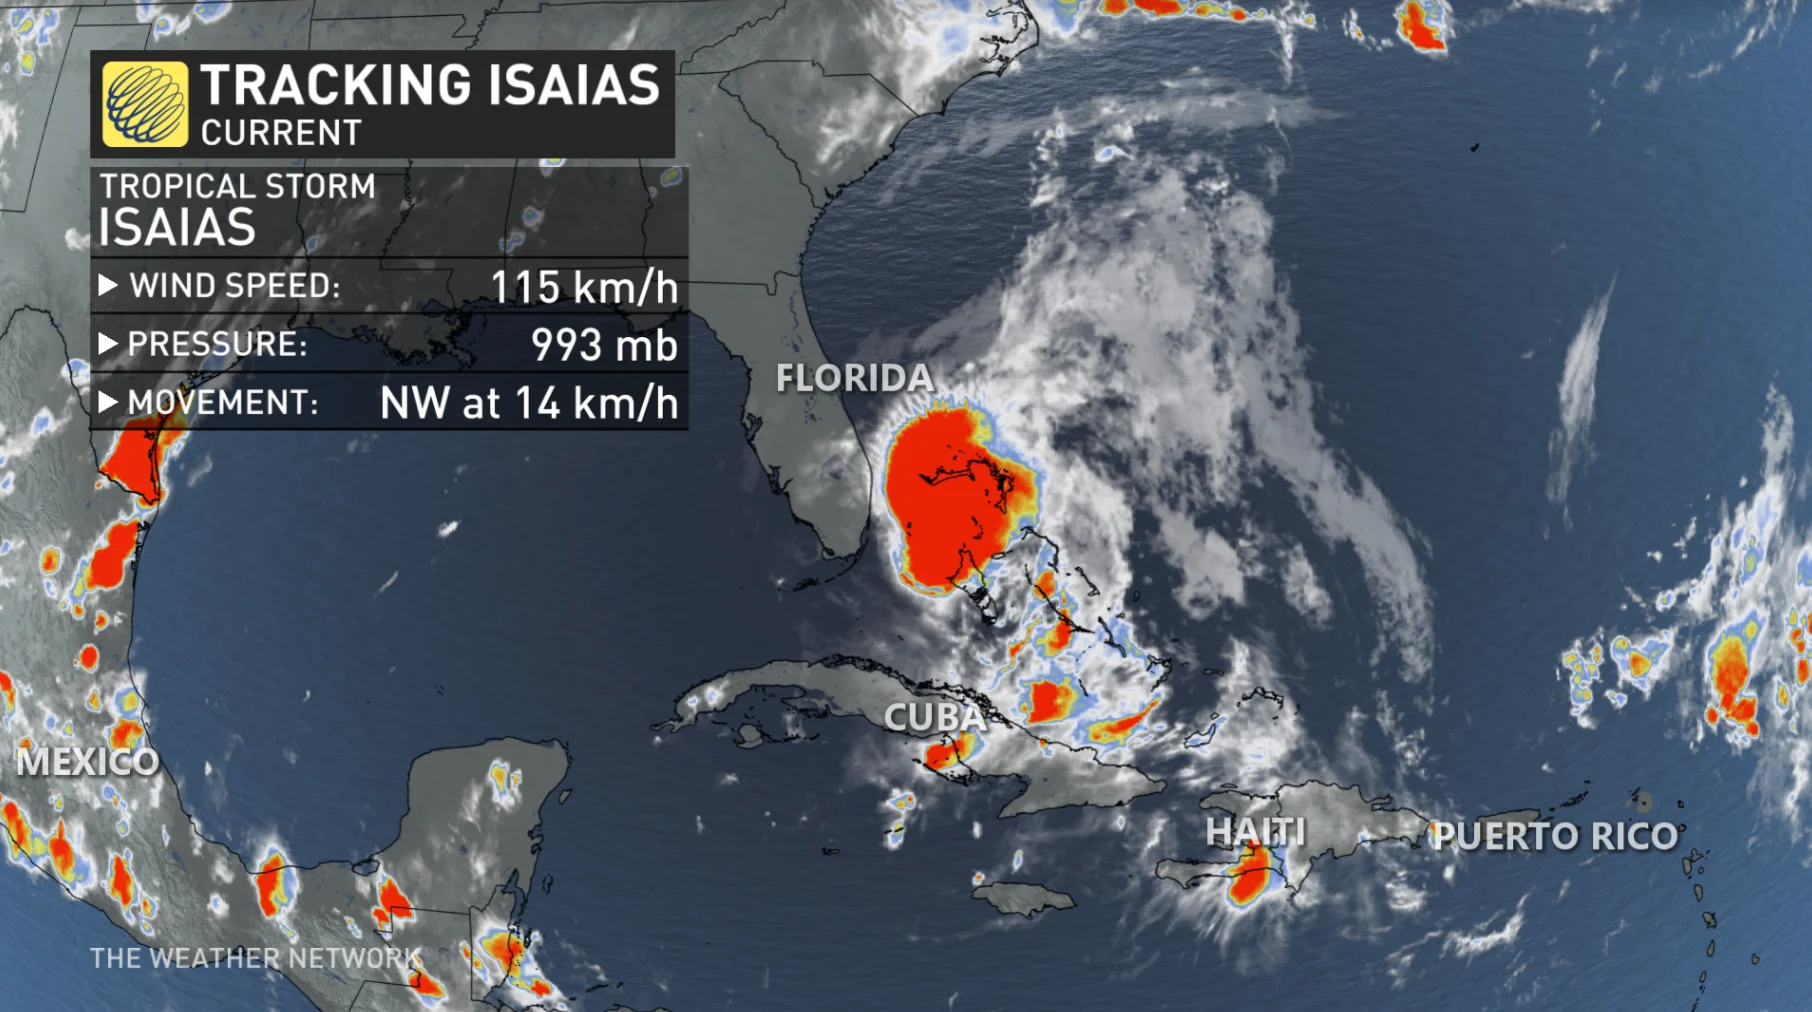 Tropical storm Isaias